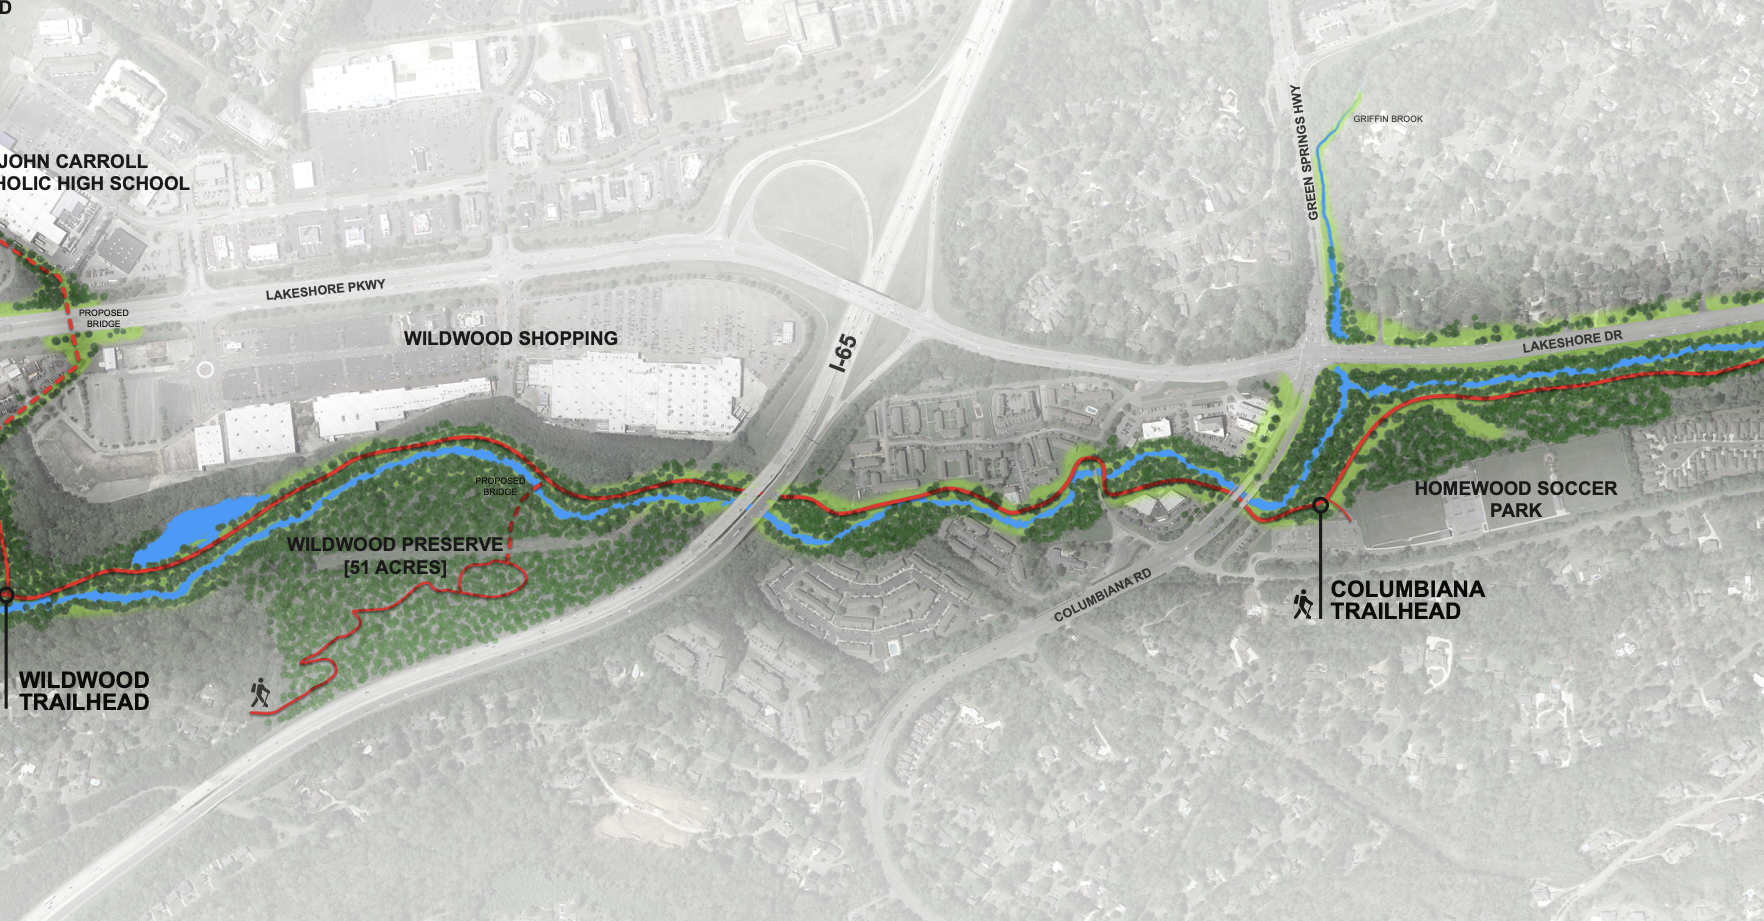 Homewood plans to extend Shades Creek Greenway in 2022